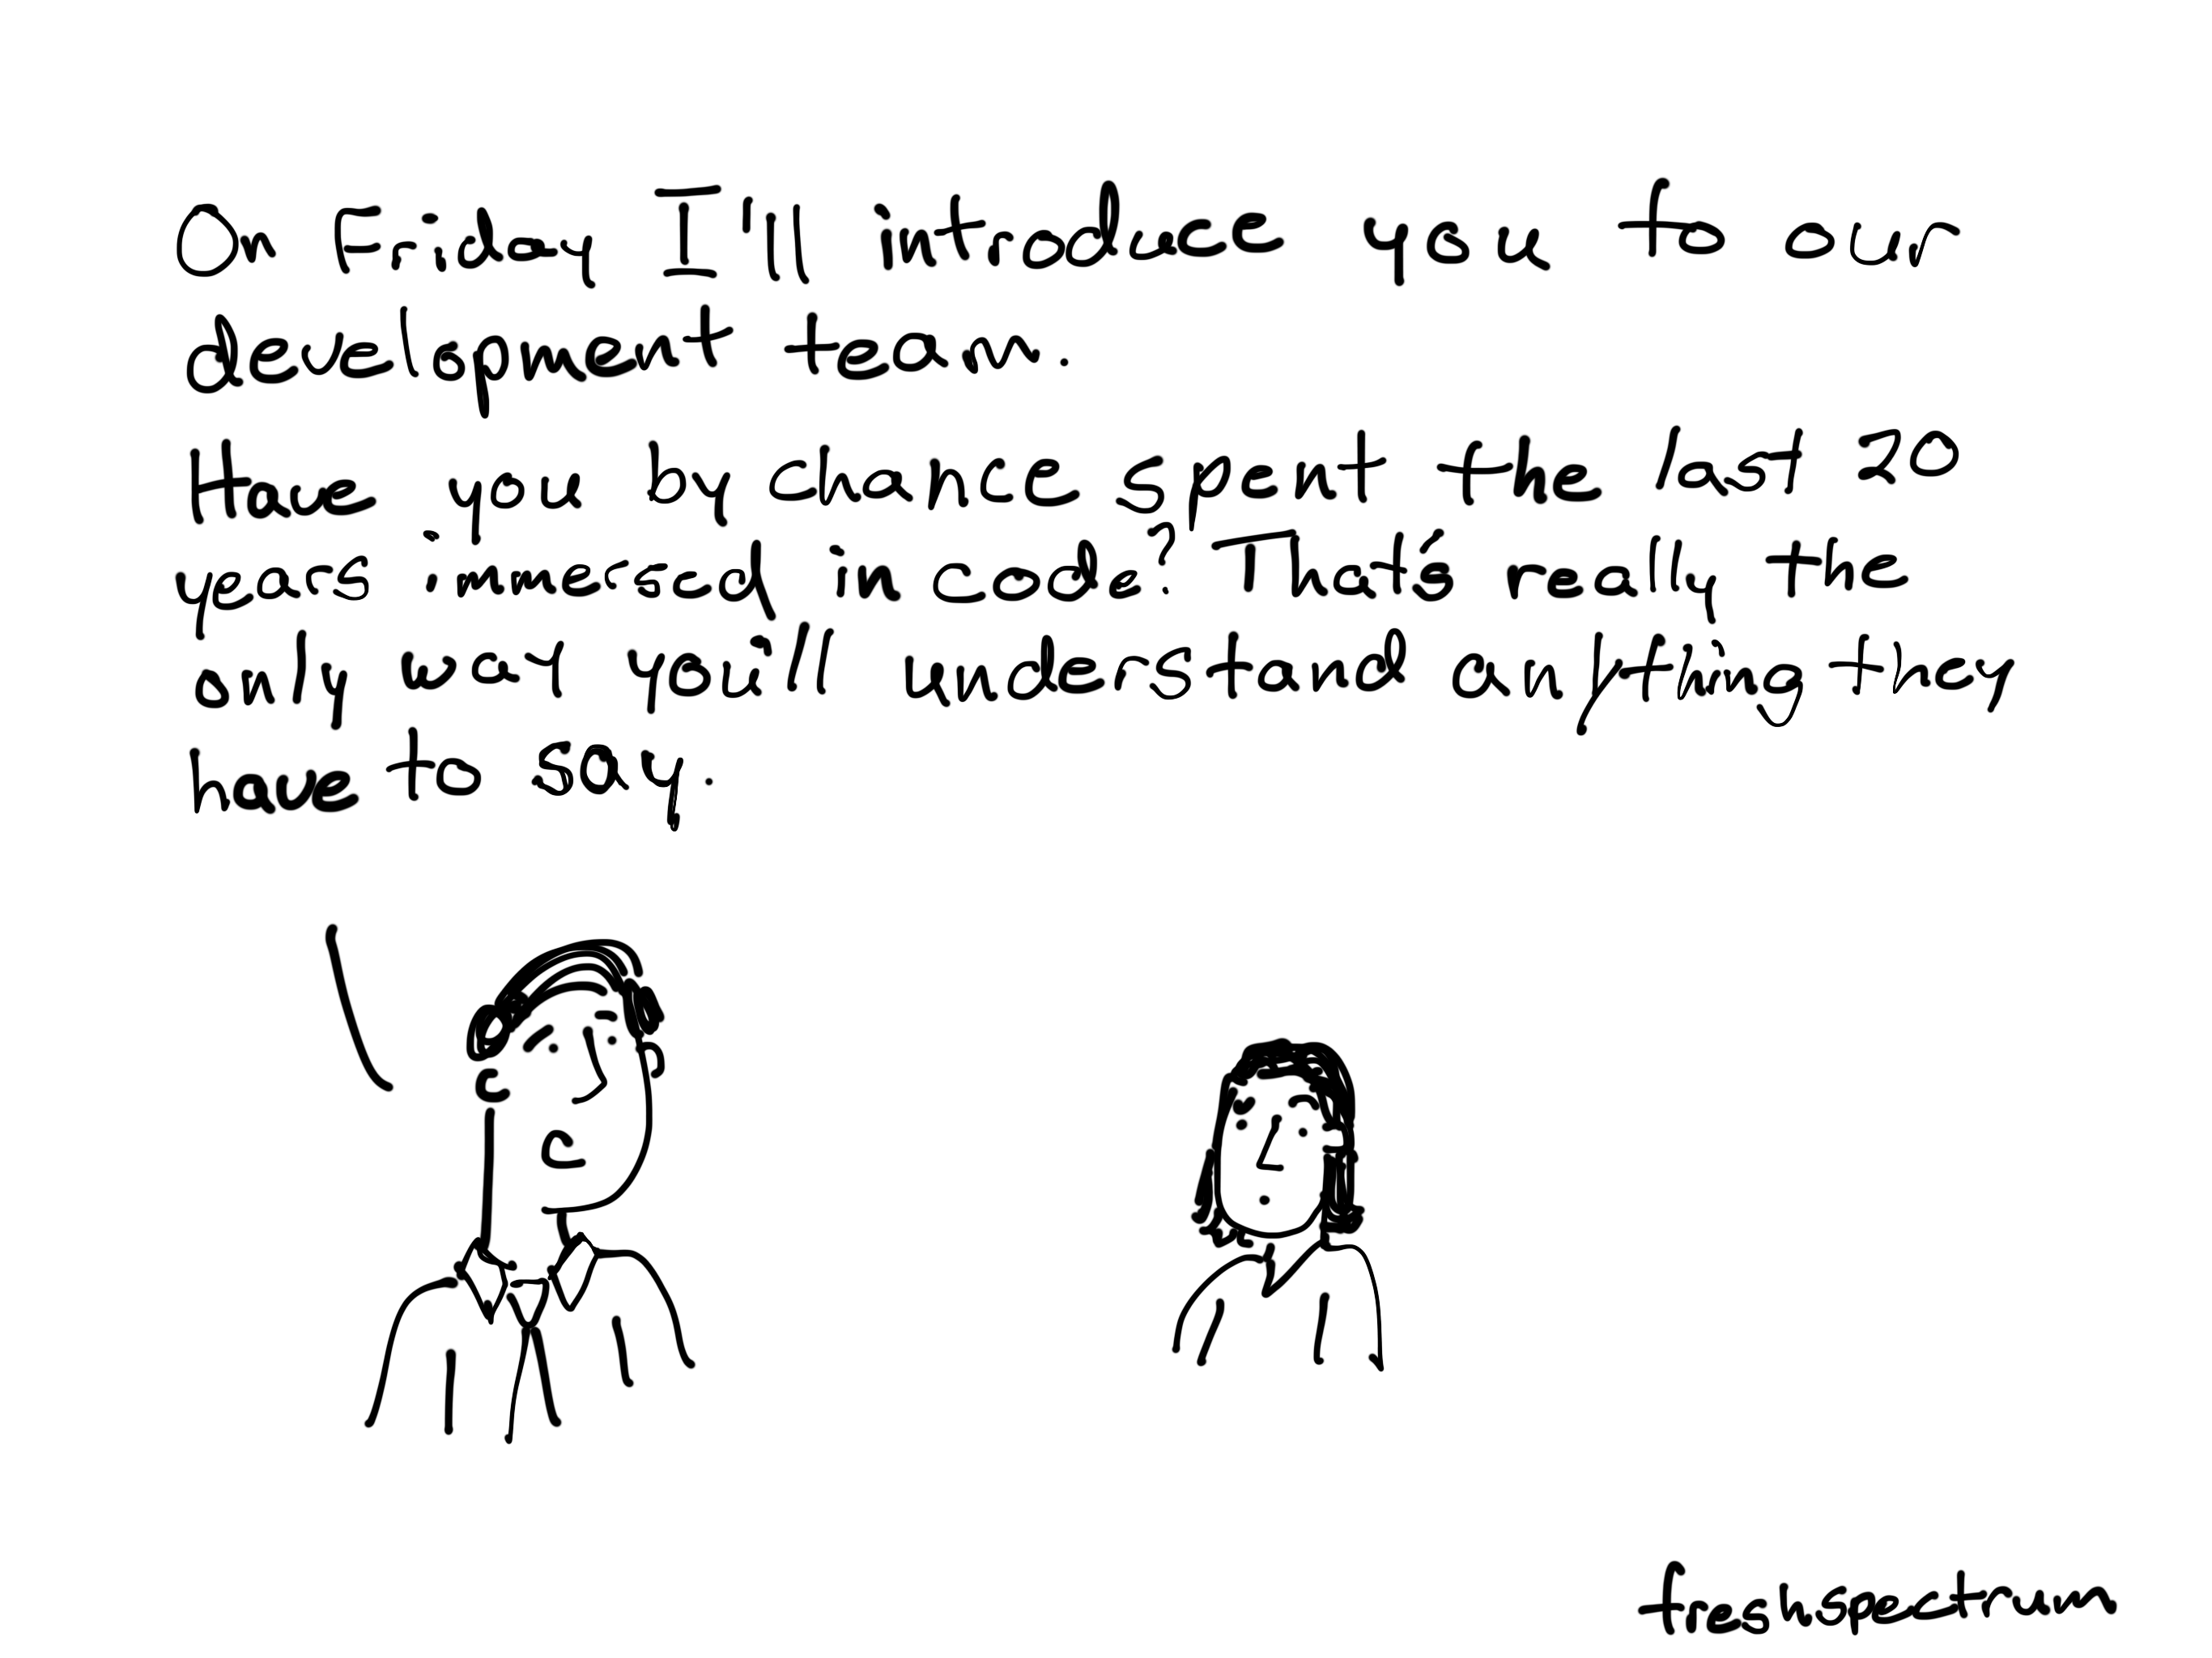 On Frida I'll introduce you to our development team. Have you by chance spent the last 20 years immersed in code. That's really the only way you'll understand anything they have to say.